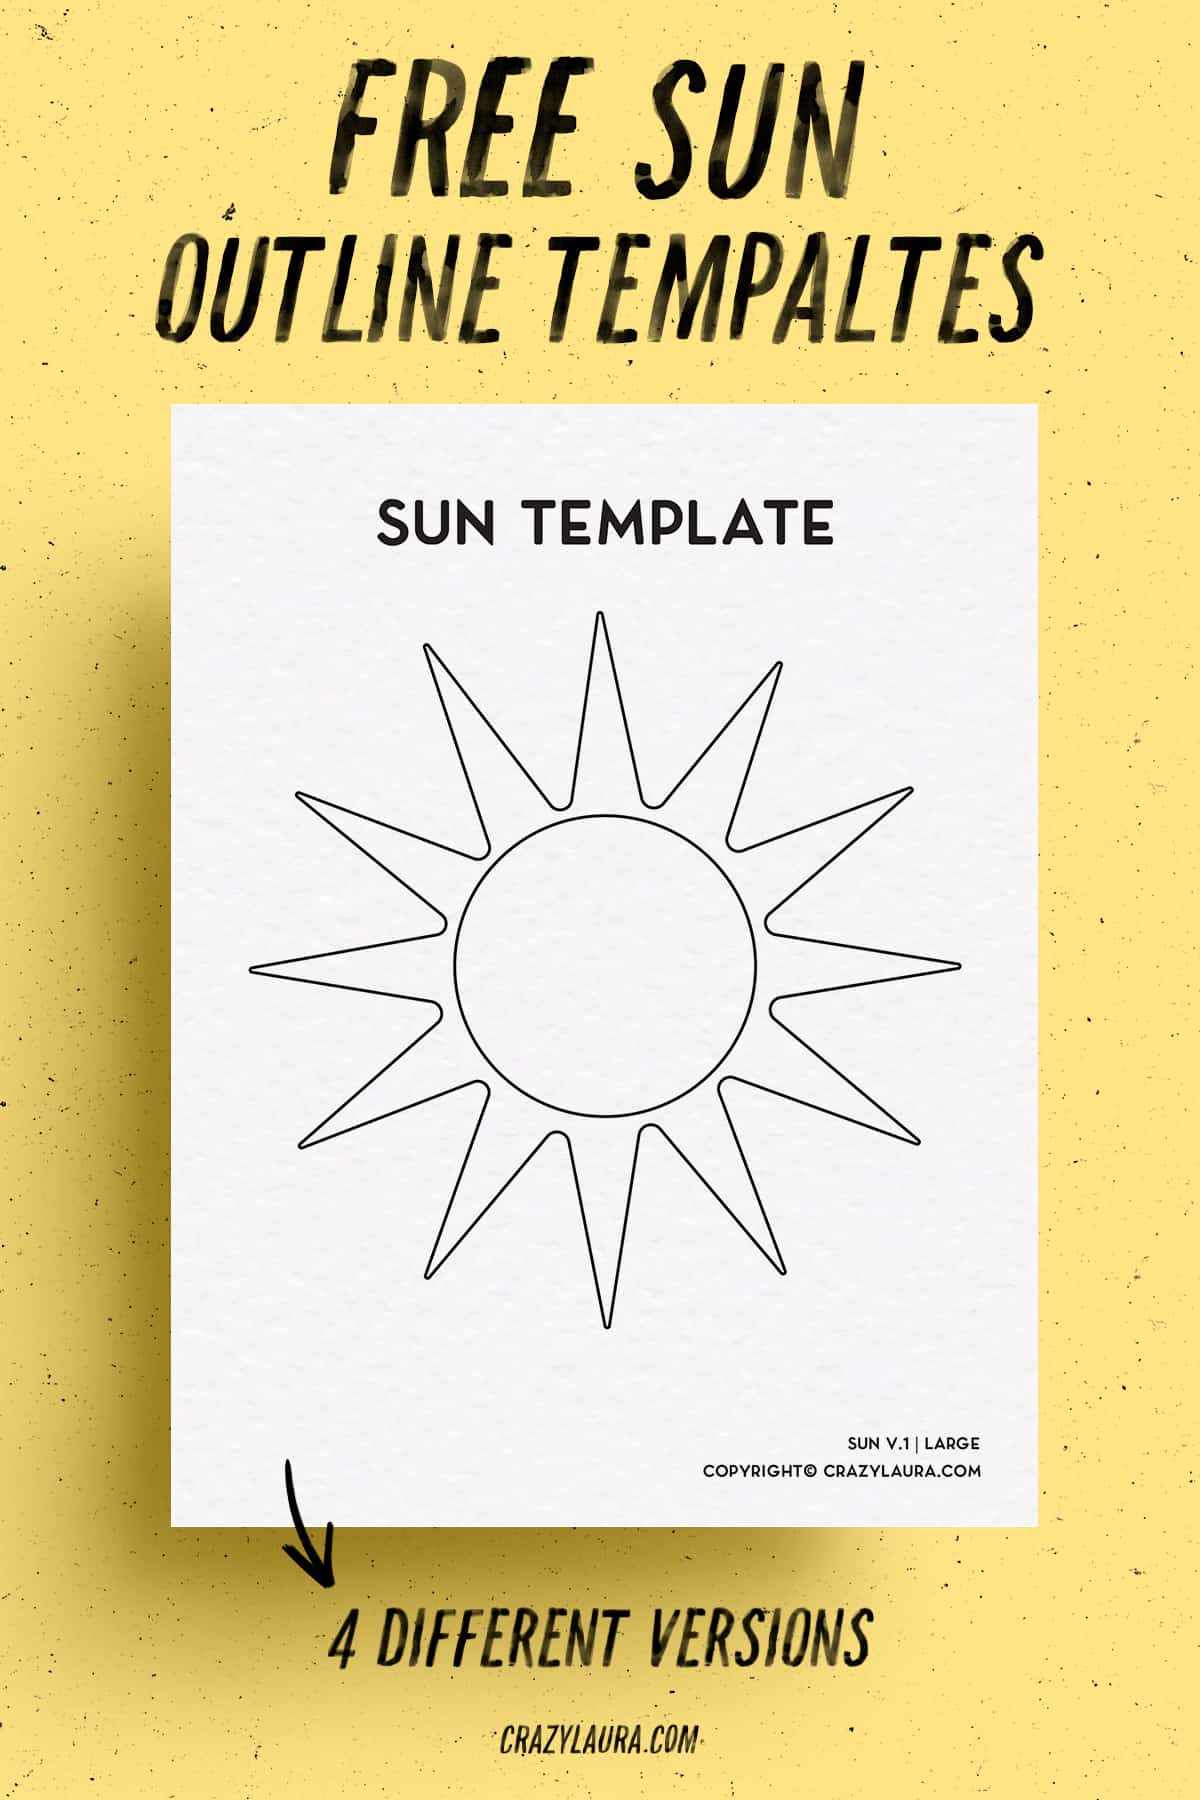 sun templates to download